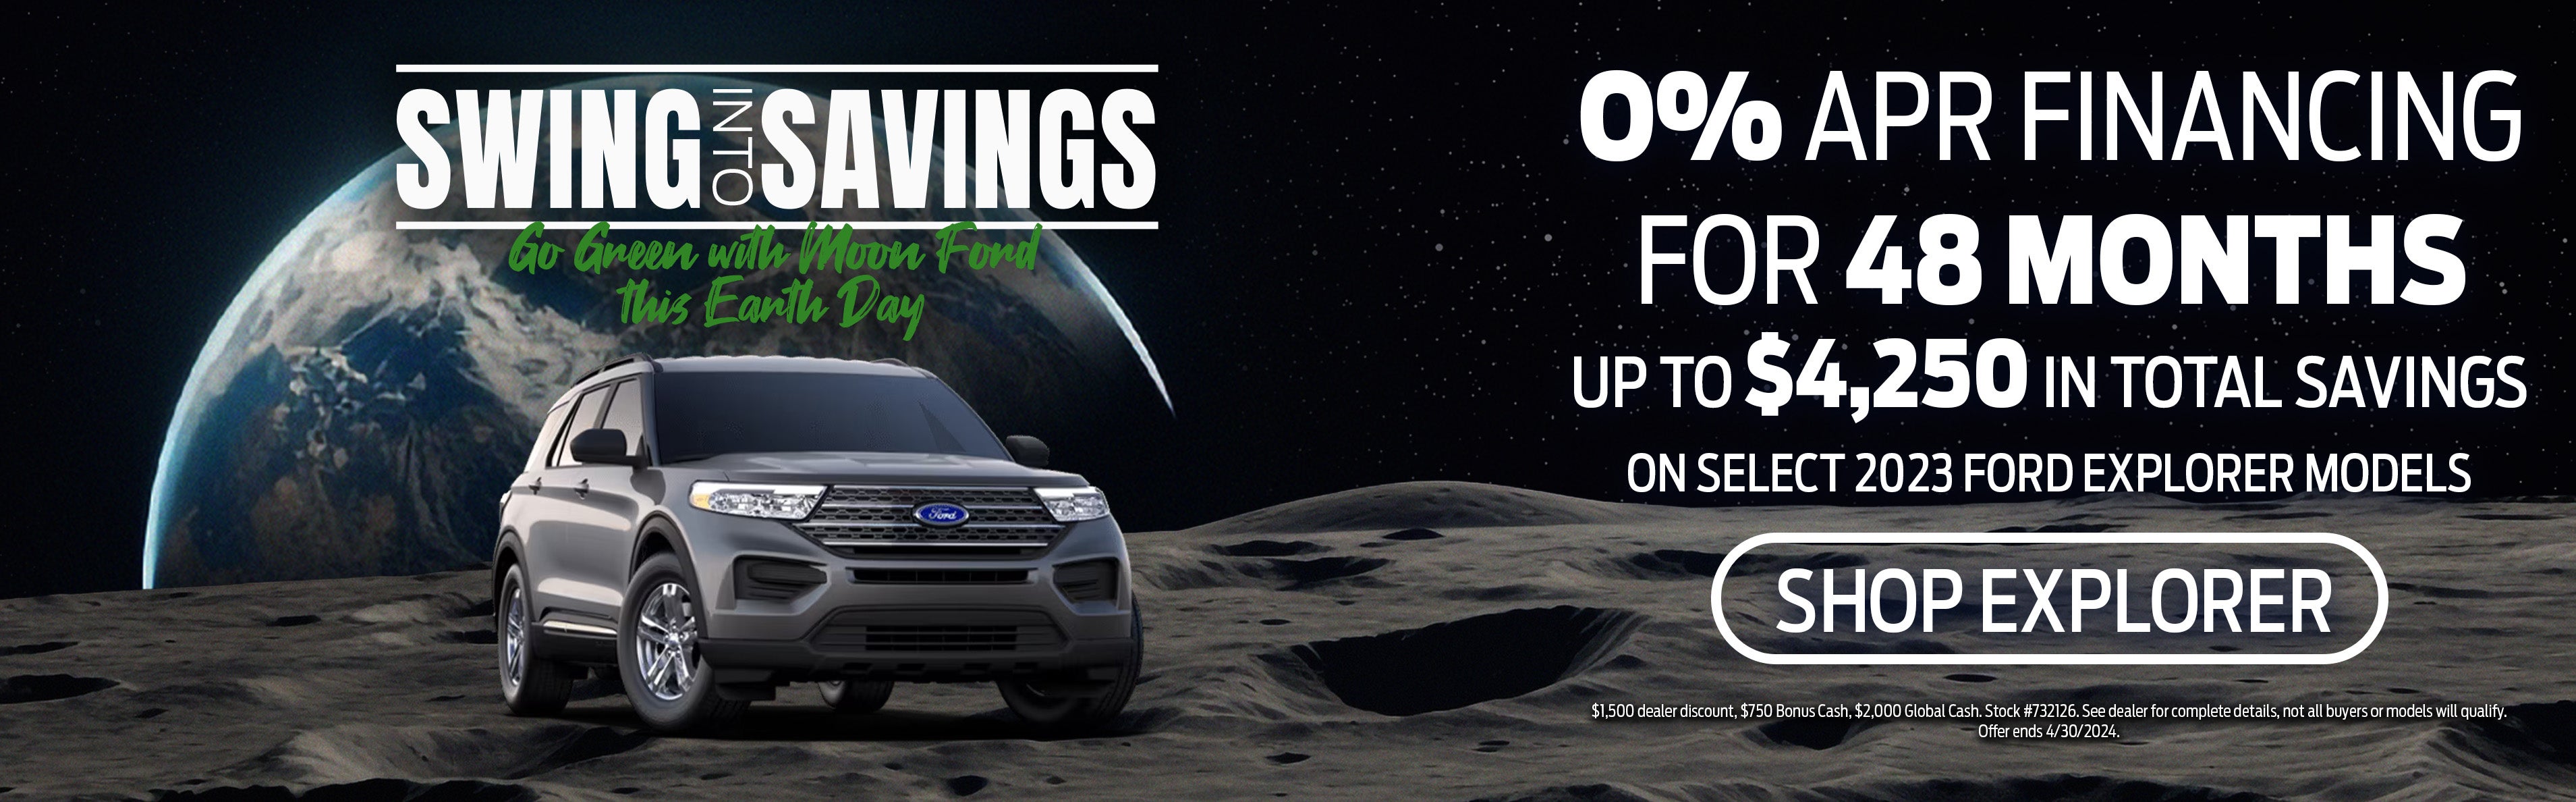 0% for 48 months + up to $4,250 savings on 2023 Explorer